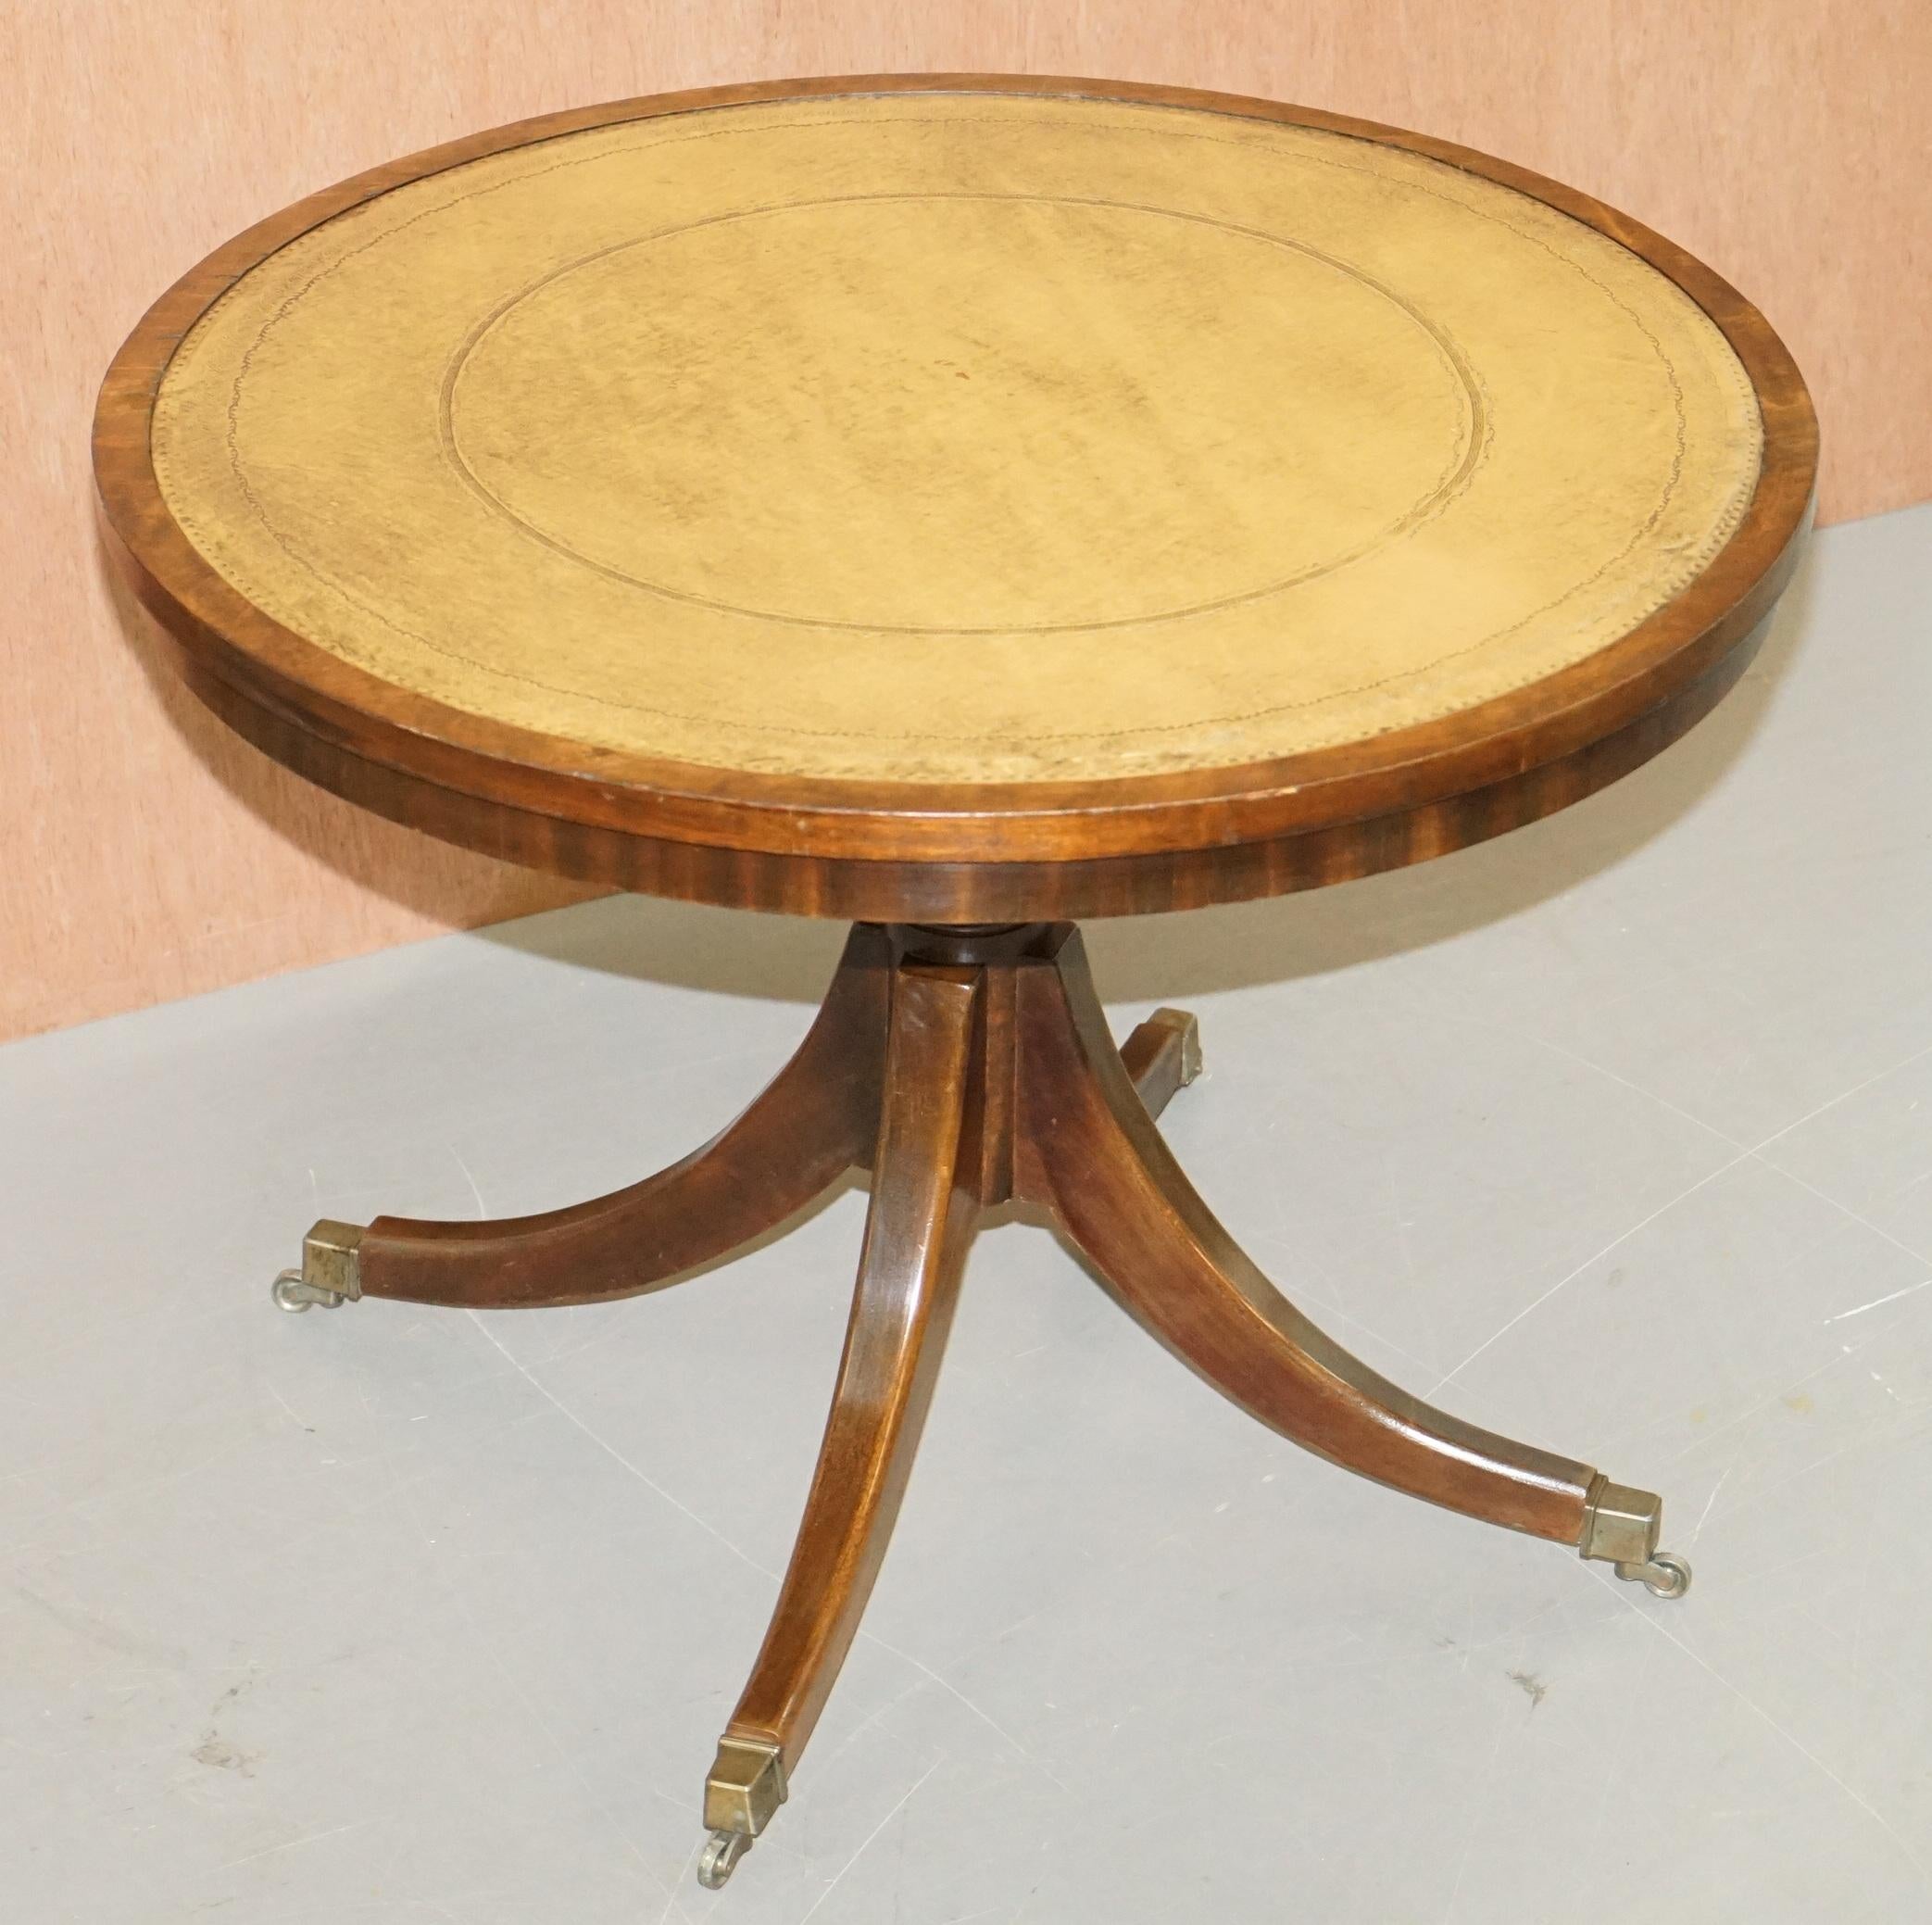 We are delighted to offer for sale this lovely sized flamed mahogany with green leather top and gold leaf embossing centre or occasional table

A good looking occasional table, designed to sit in the centre of a large hallway with a vase and